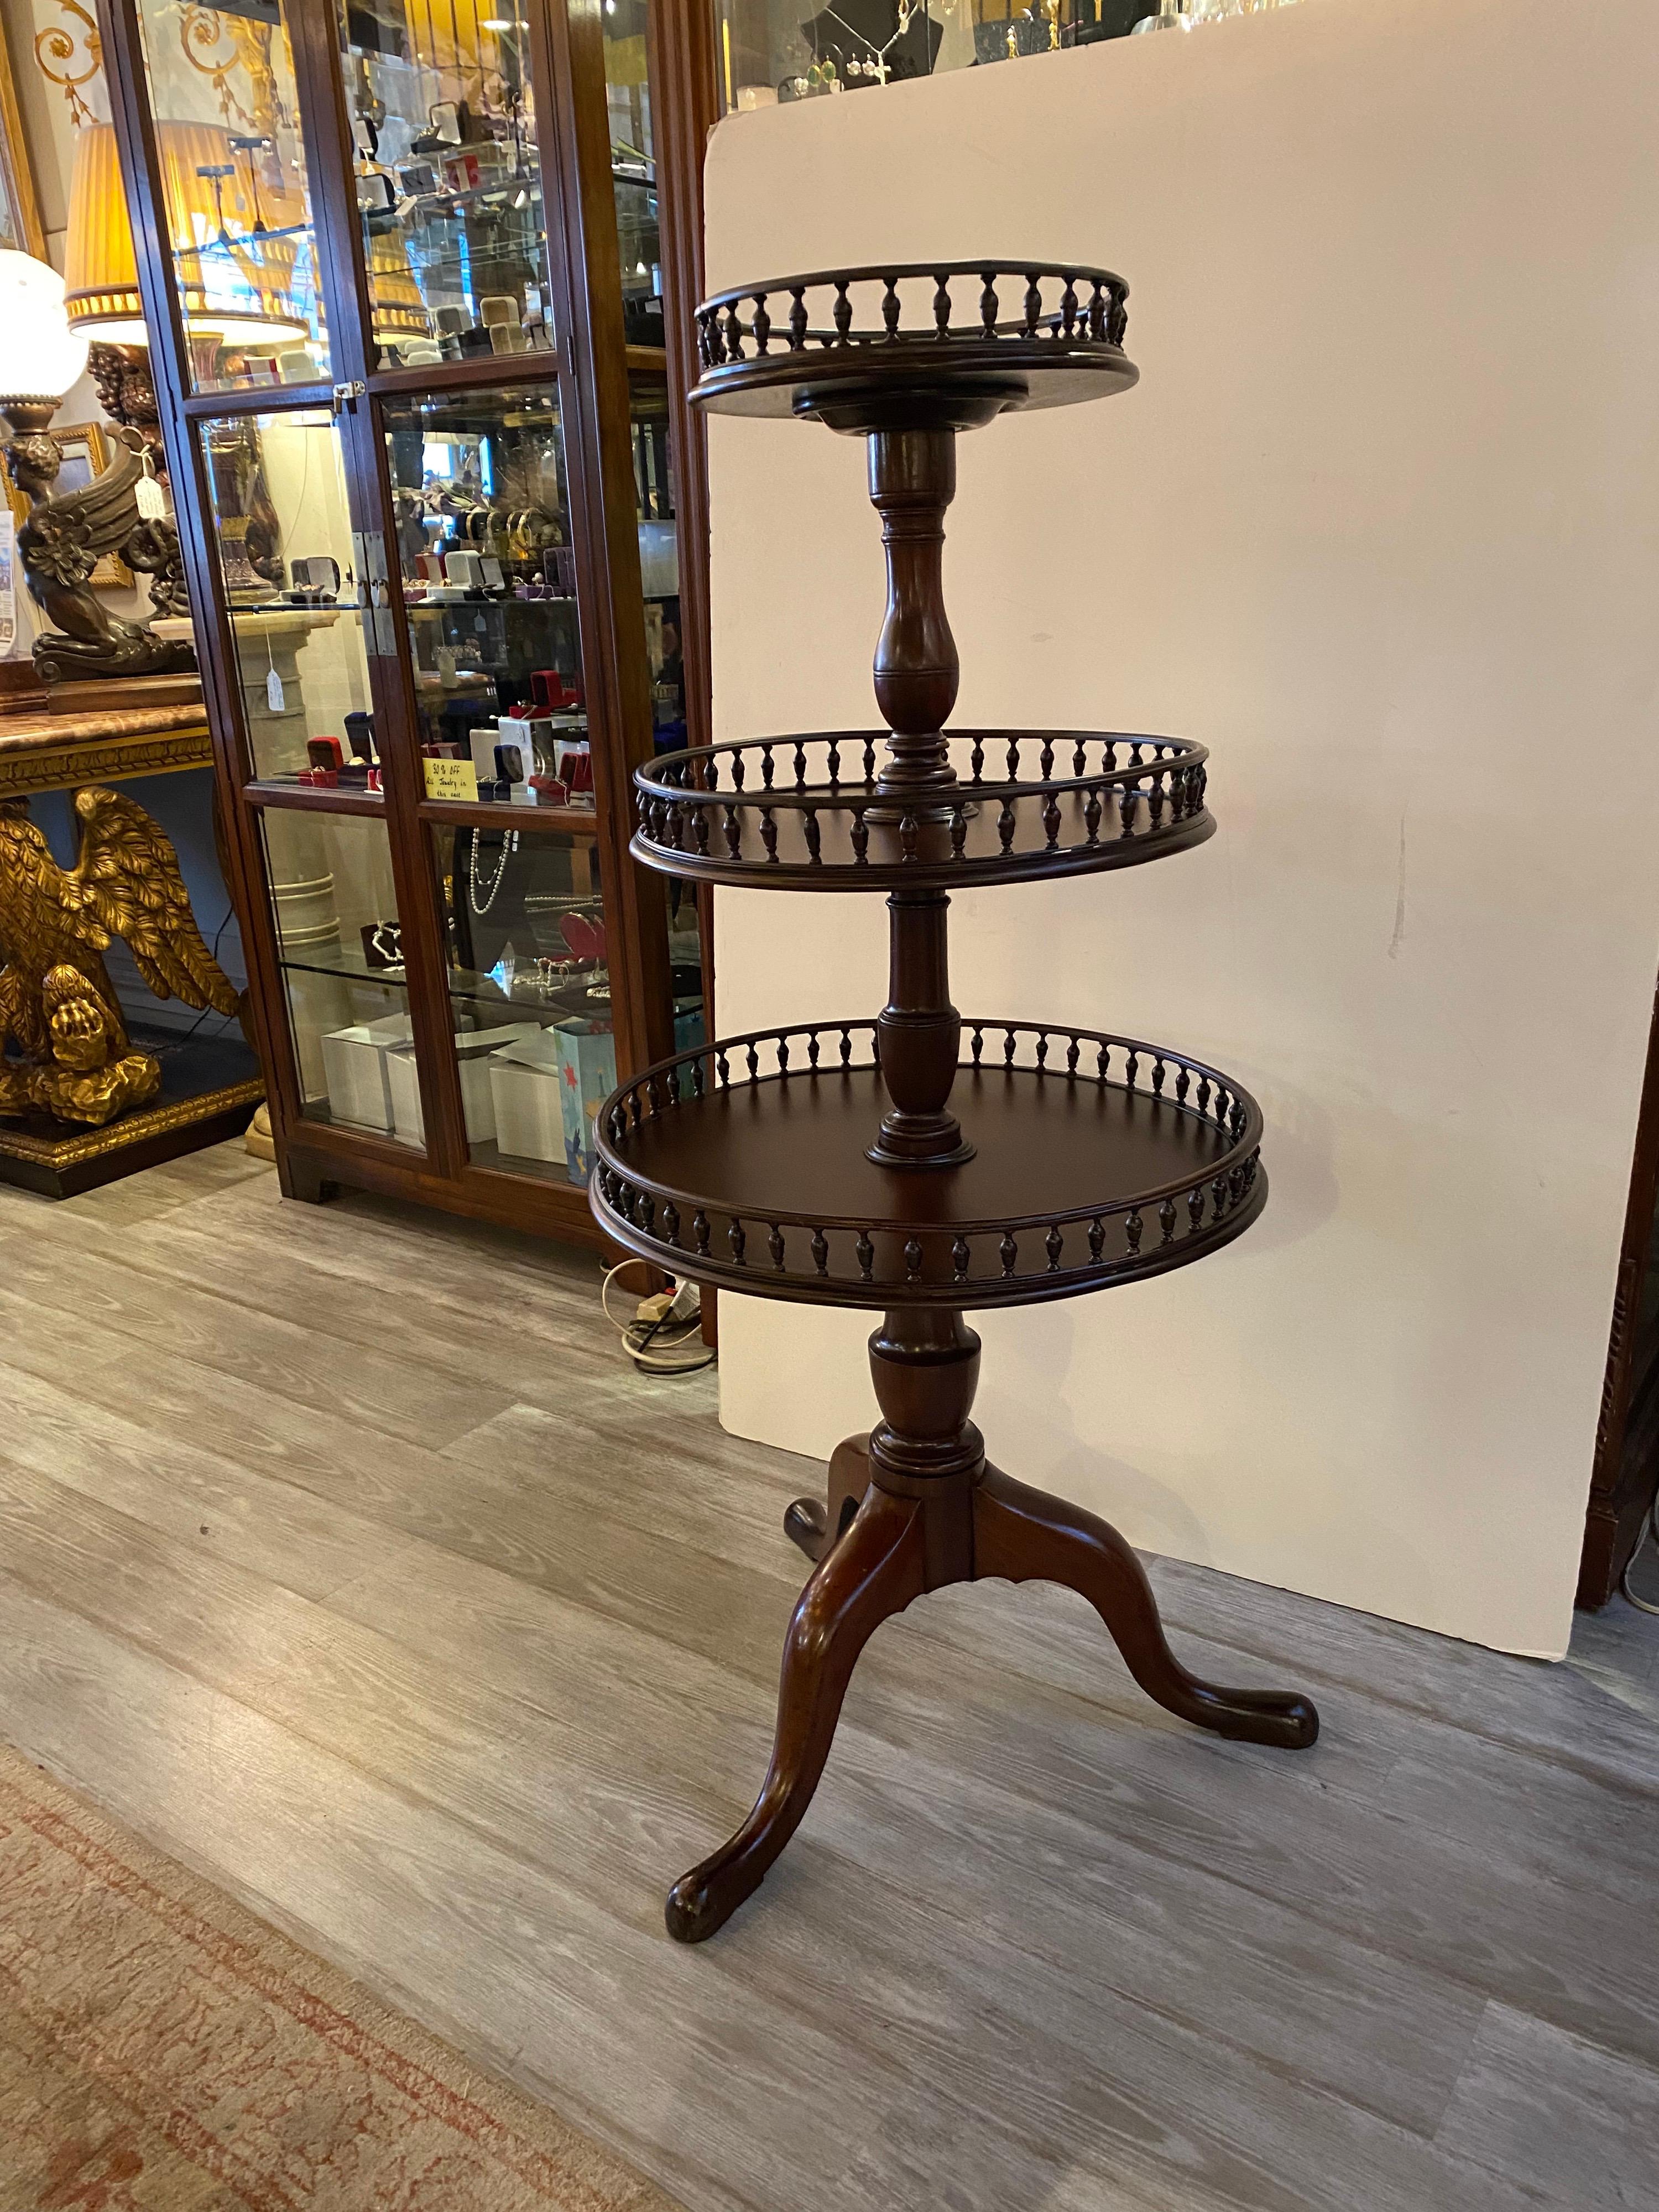 Antique Circa 1800-1820 solid mahogany three tiered dumb water table. The round tops with hand carved urn form rungs along the gallery edges on all tiers. The piece rests on three gently curved legs. The center column that screws together with an